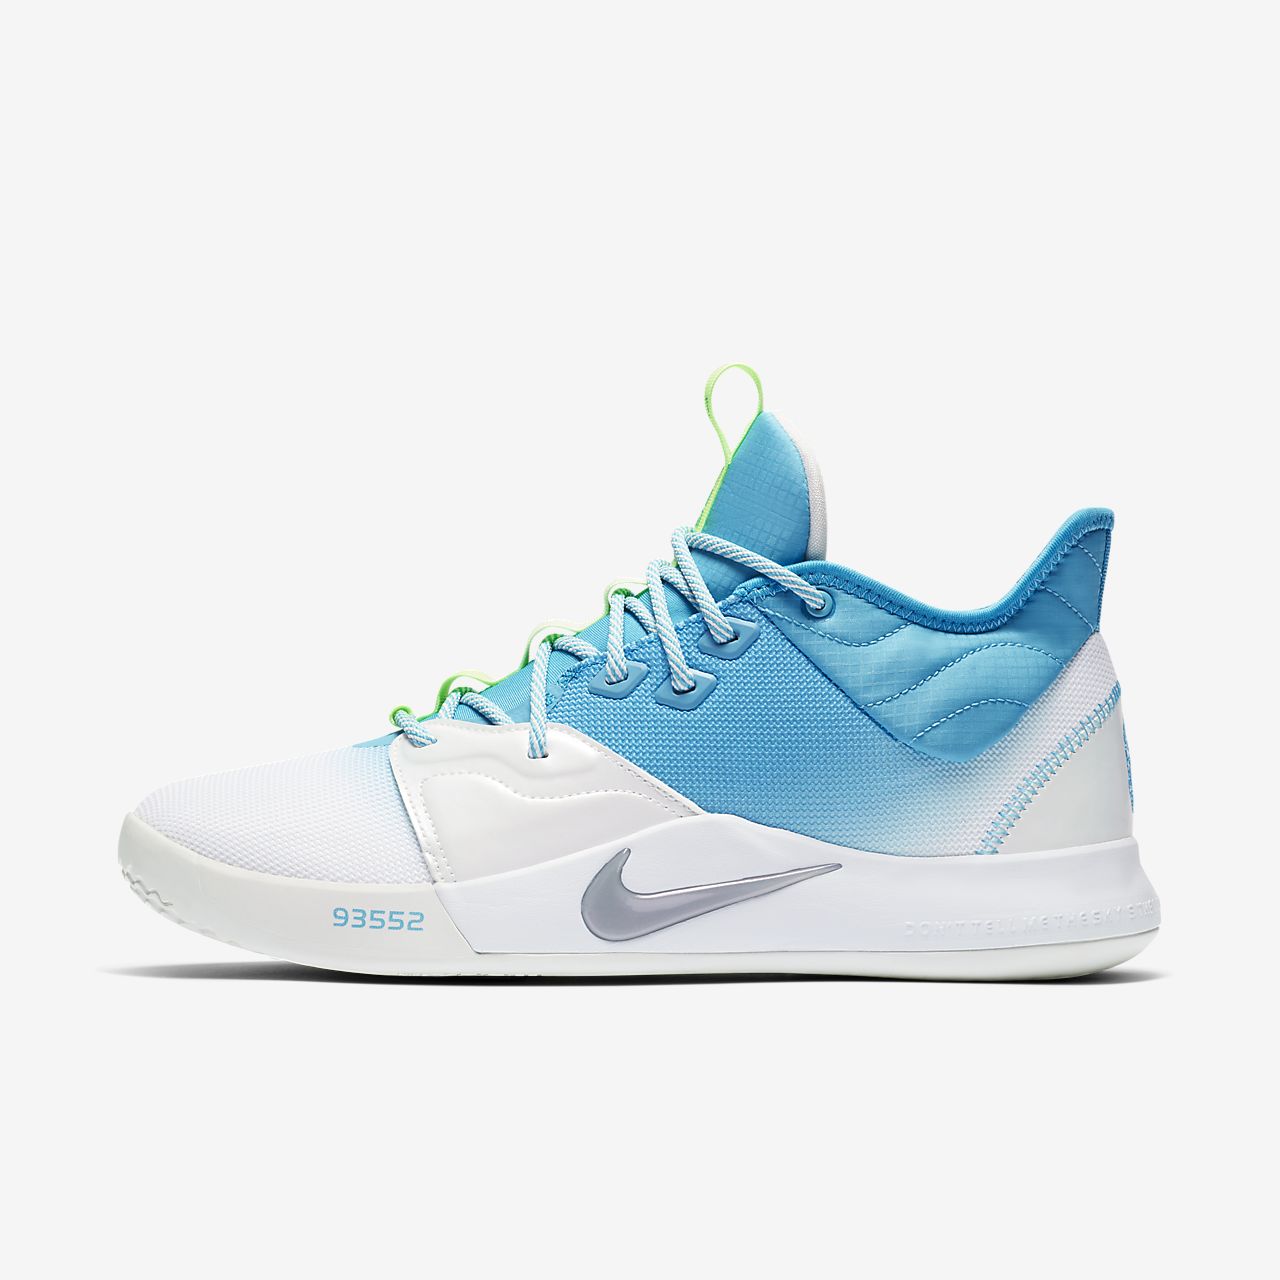 philippines Sale Nike Basketball Shoes 